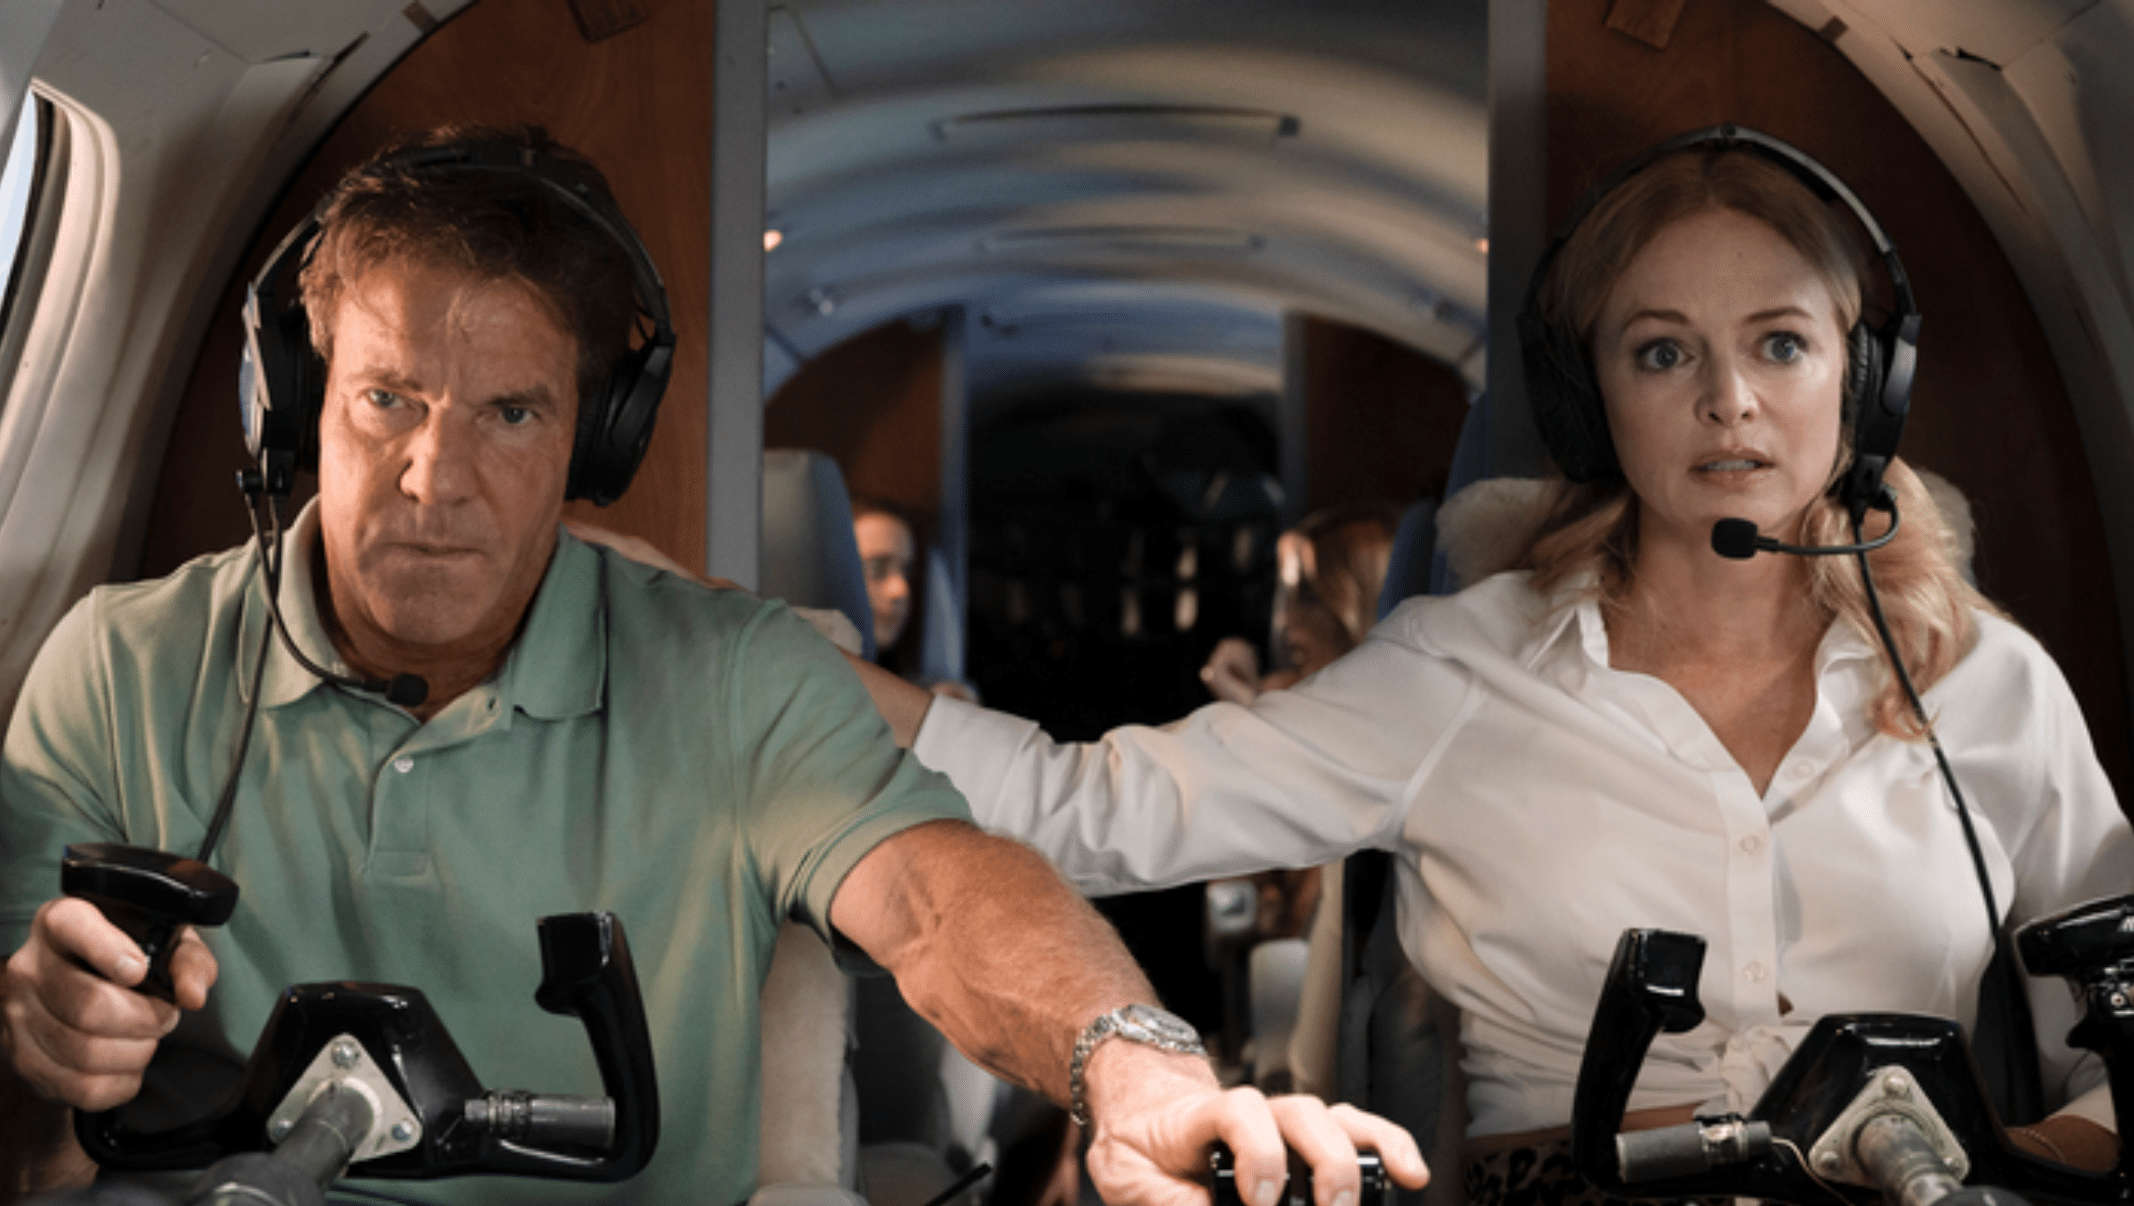 On a Wing and a Prayer: Easter film starring Denis Quaid